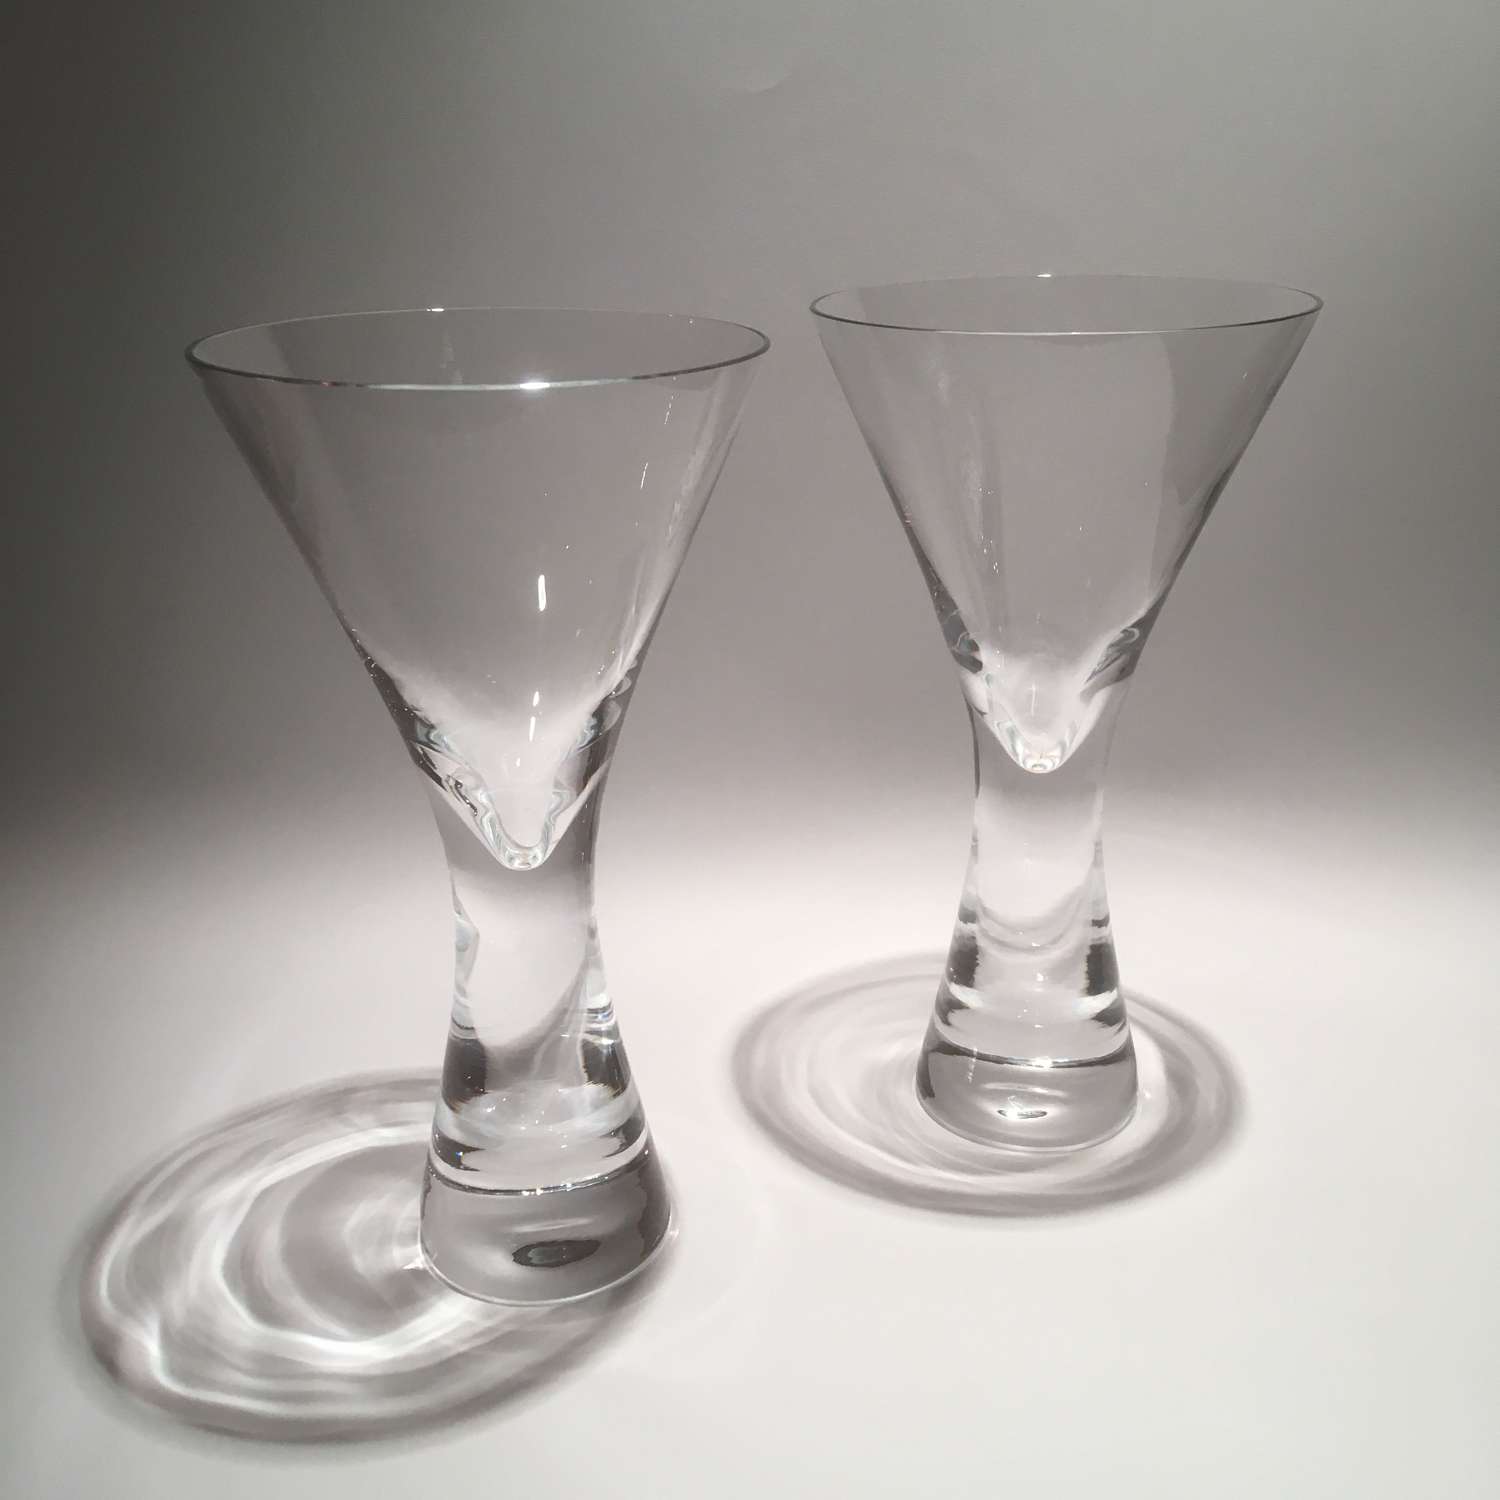 A Good Size Pair of Gift Boxed Cocktail Glasses